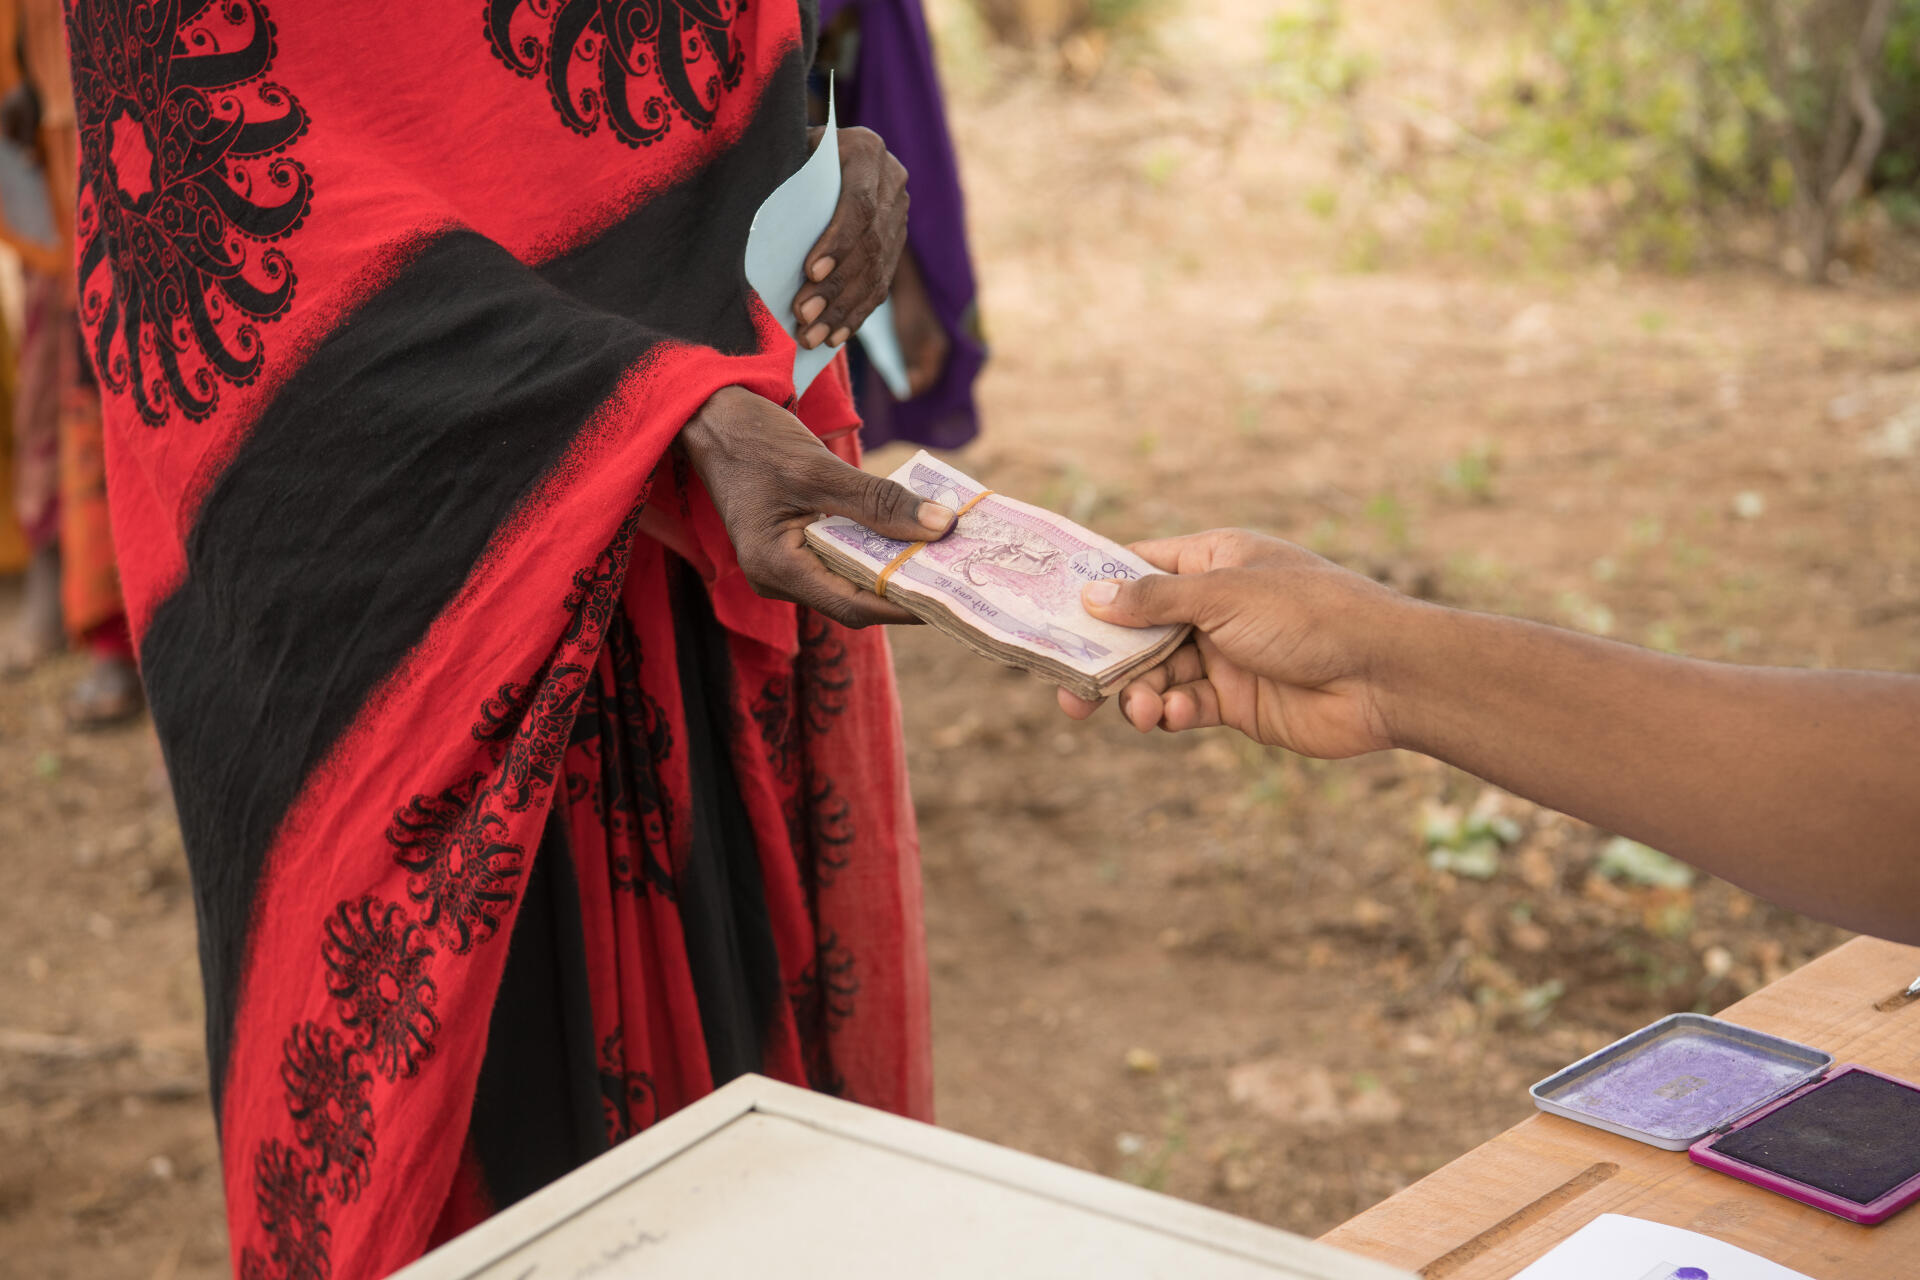 Two people exchange a stack of Ethiopian currency. The bills are pink in color.